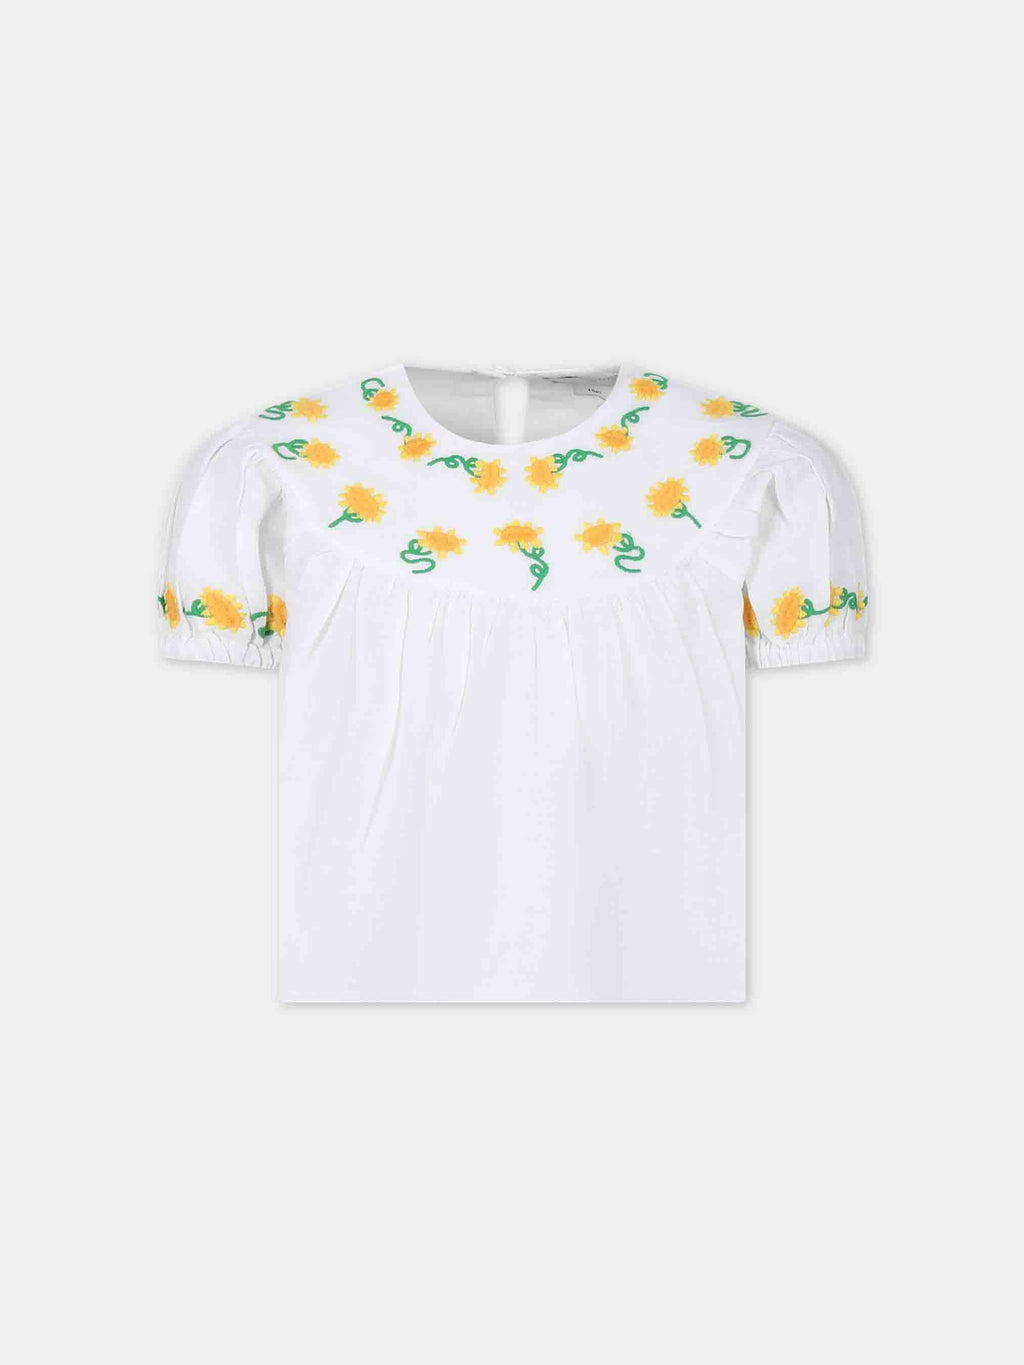 White top for girl  with embroidered sunflowers